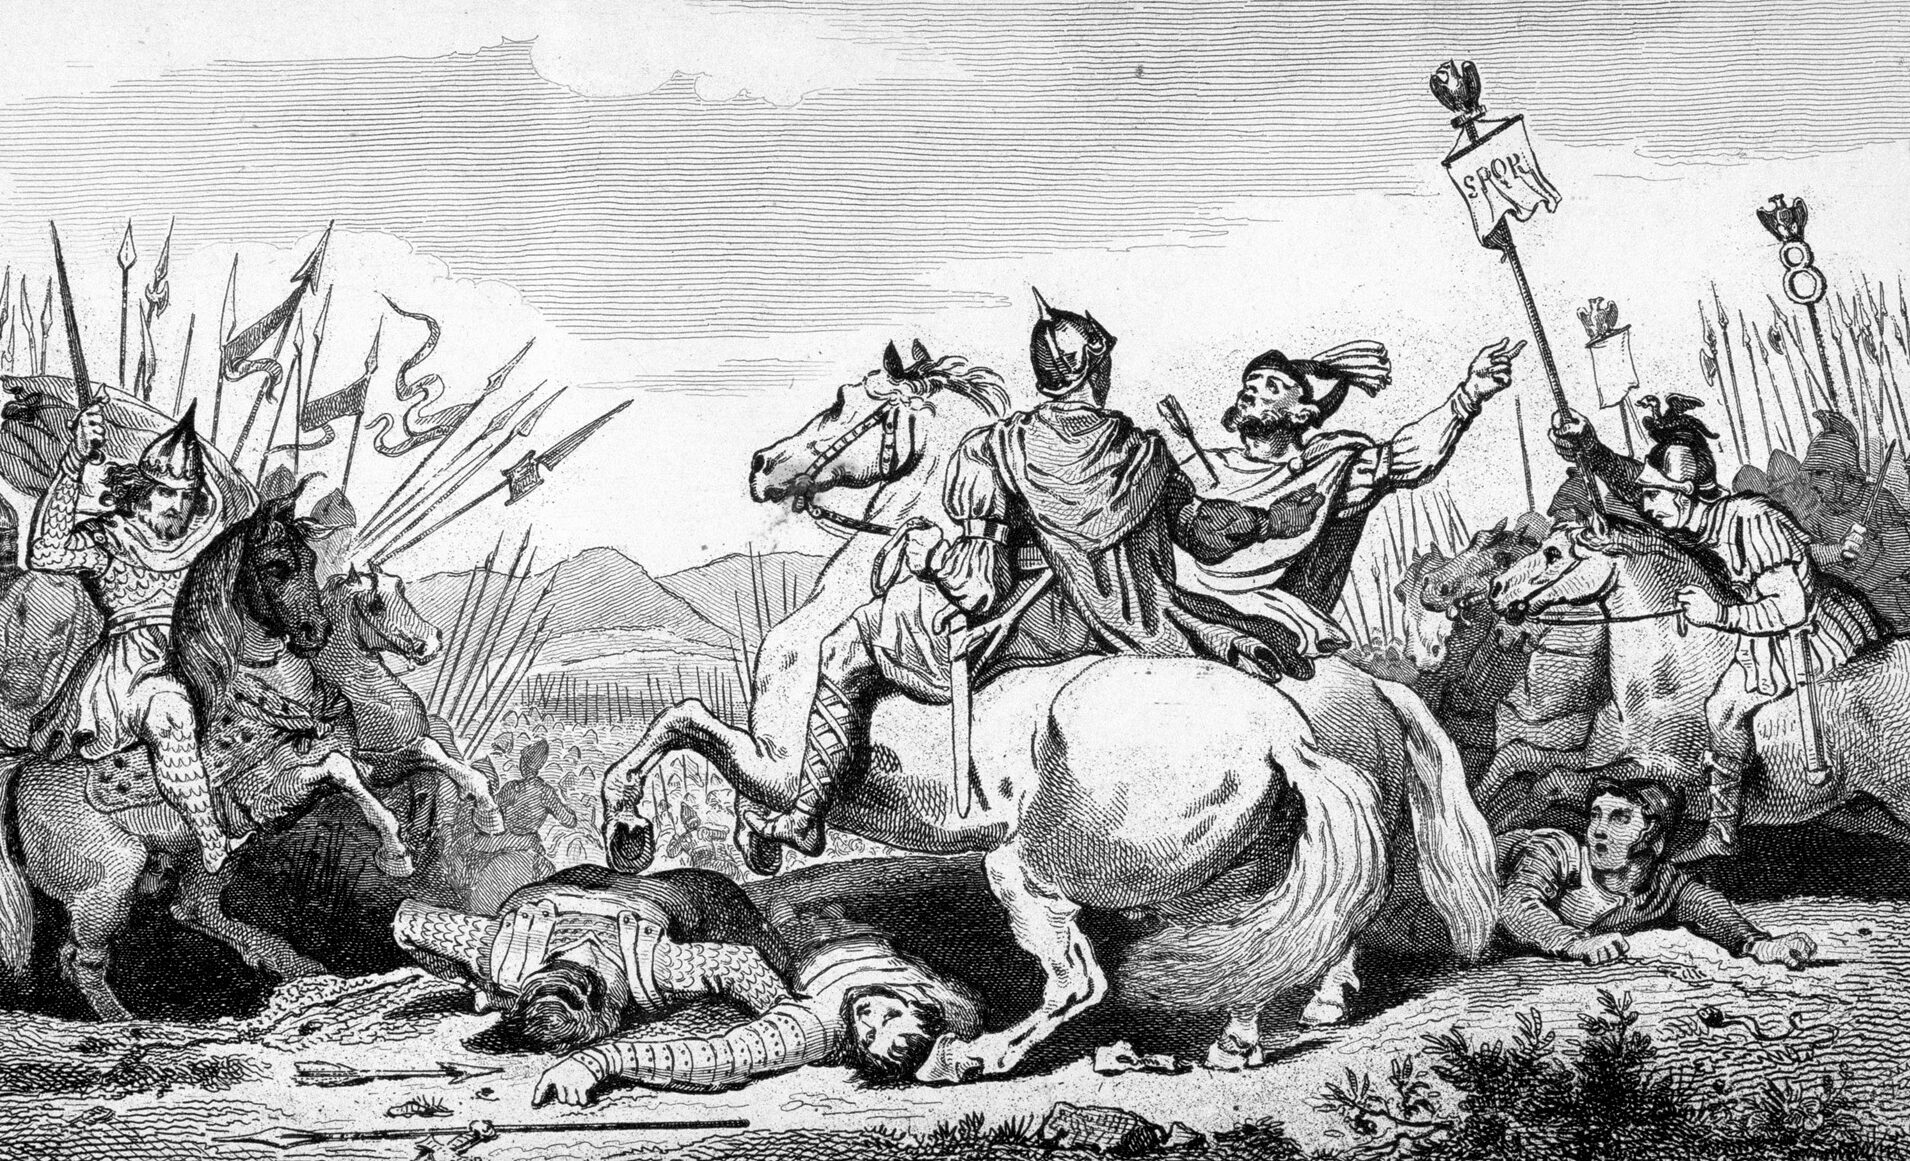 Visigoth King Theodoric is slain during the height of the battle. The moment of his death follows an attack on his flank during which he was rallying his troops to withstand the assault.